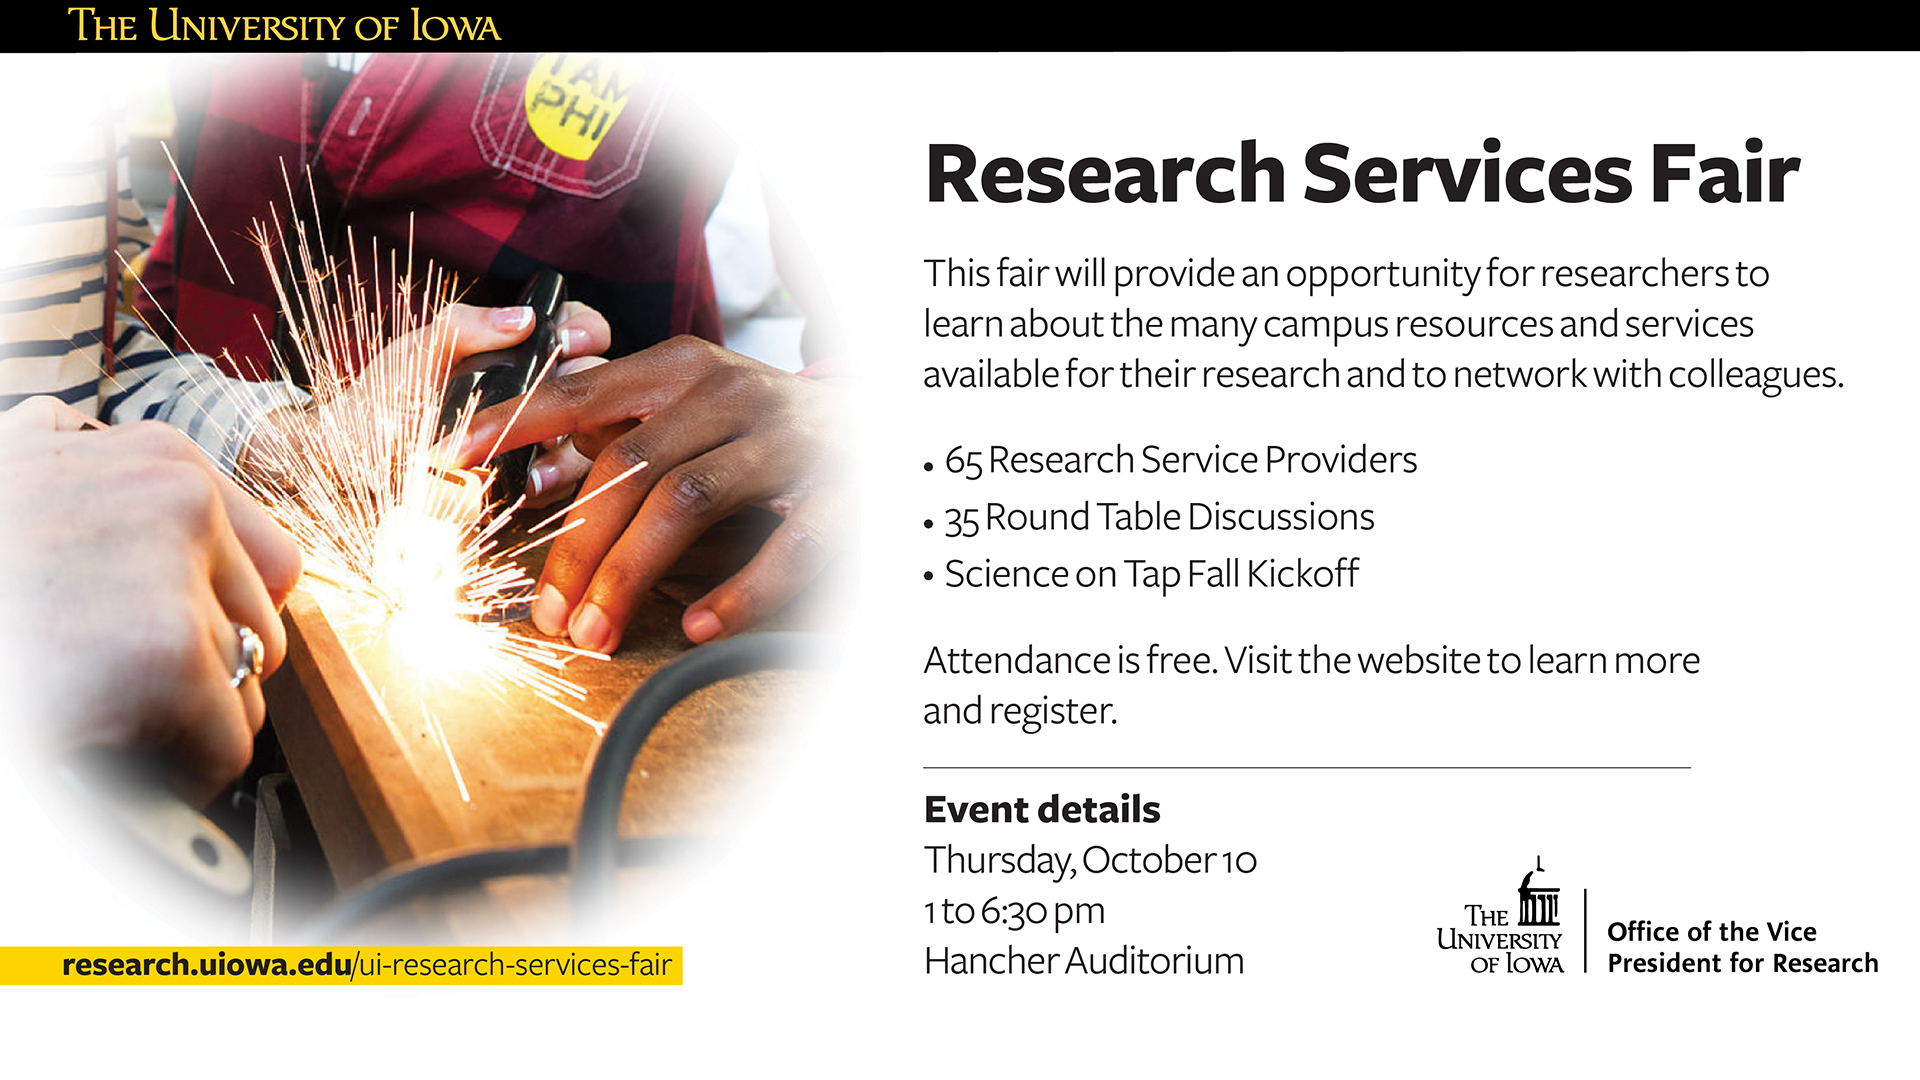 Research Services Fair October 10!